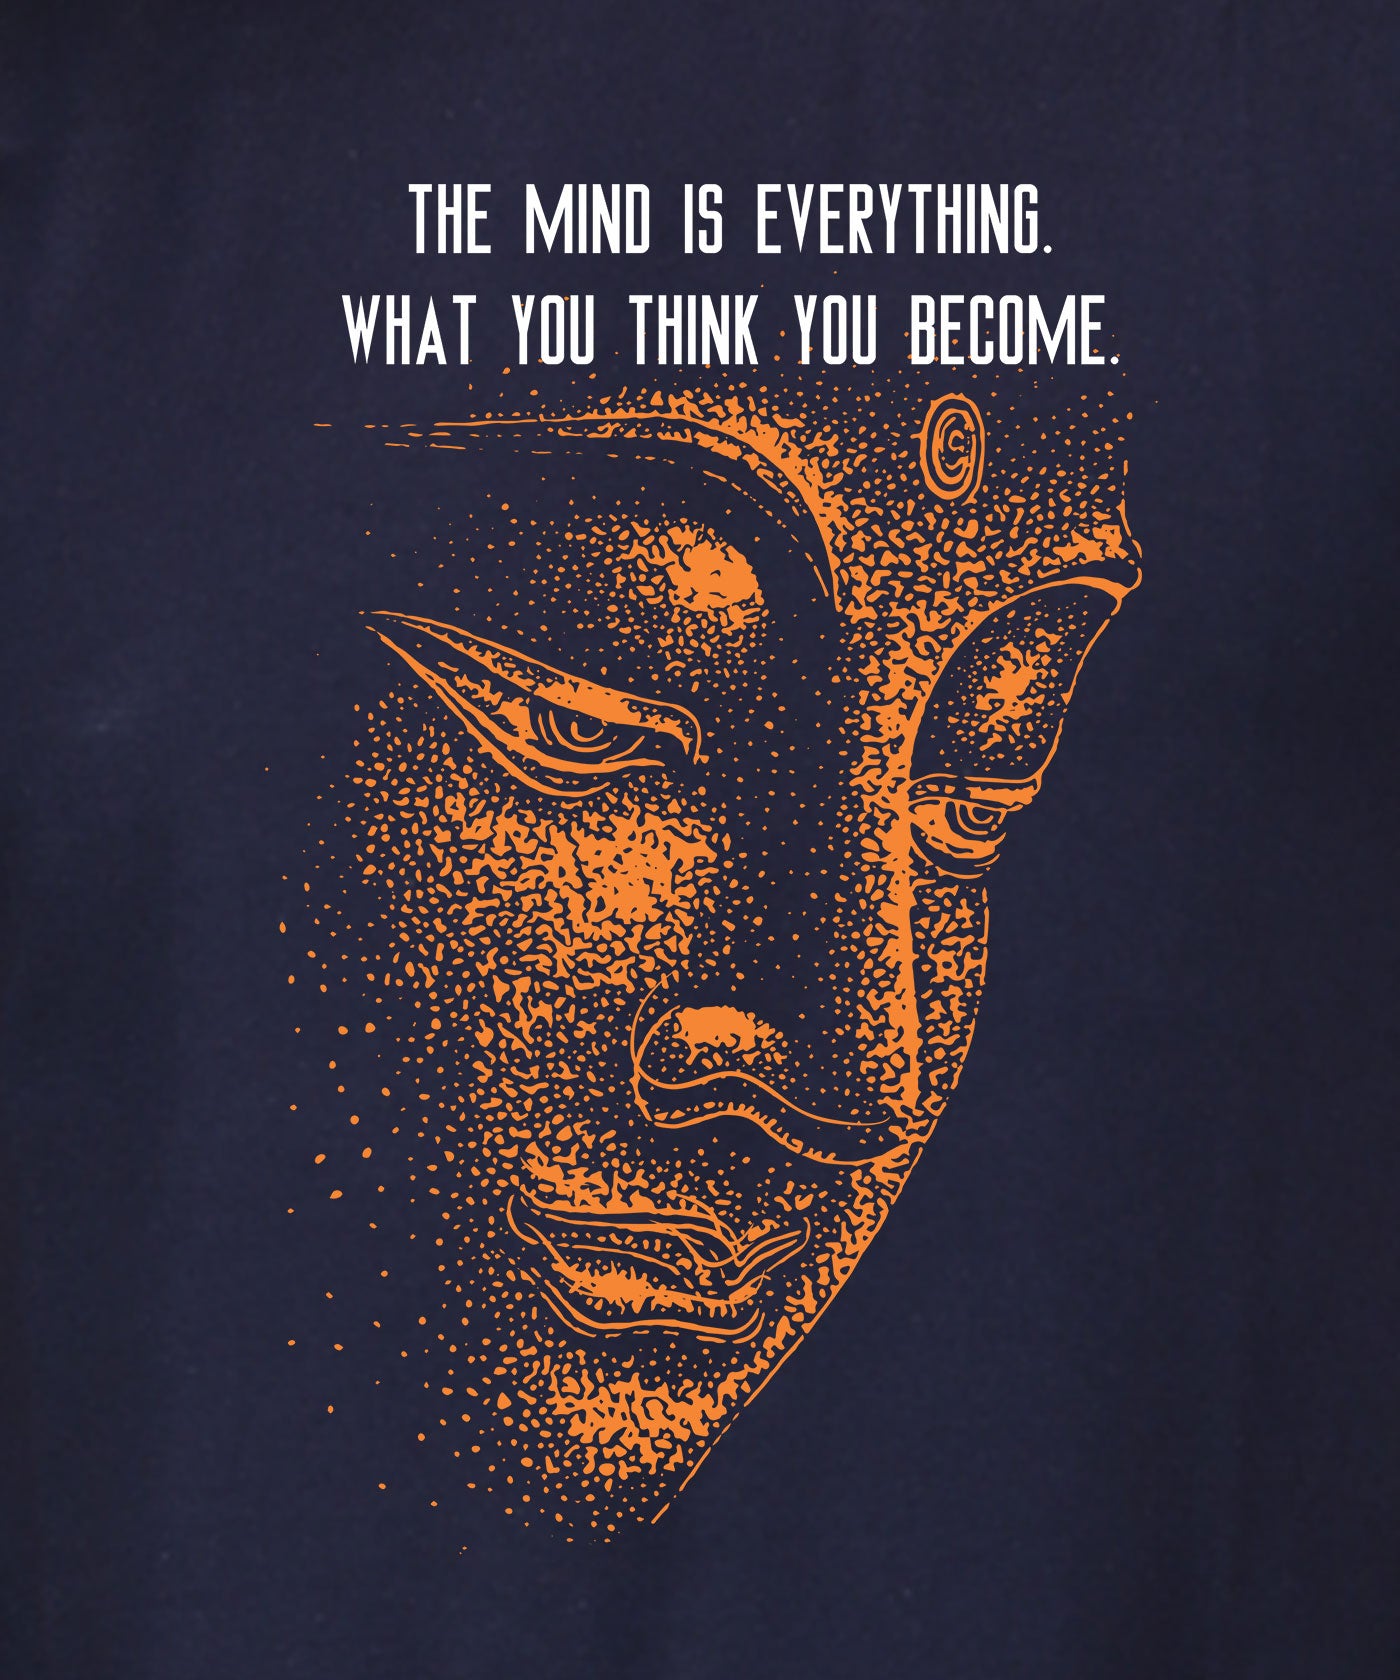 The Mind is Everything - Premium Round Neck Cotton Tees for Men - Navy Blue